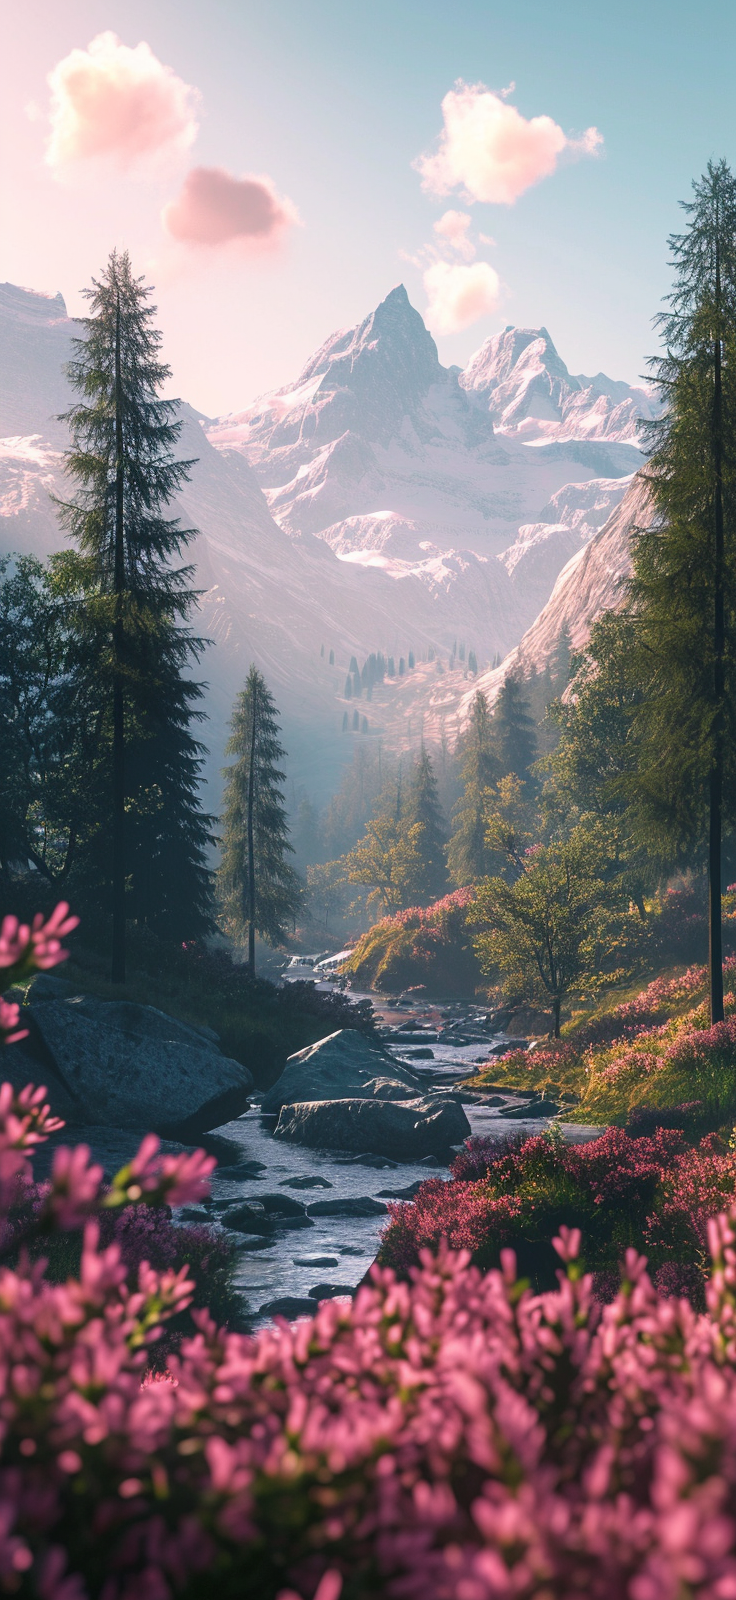 Immerse yourself in the beauty of nature with this stunning mobile wallpaper featuring a serene river flowing through a lush forest with majestic mountains in the background.